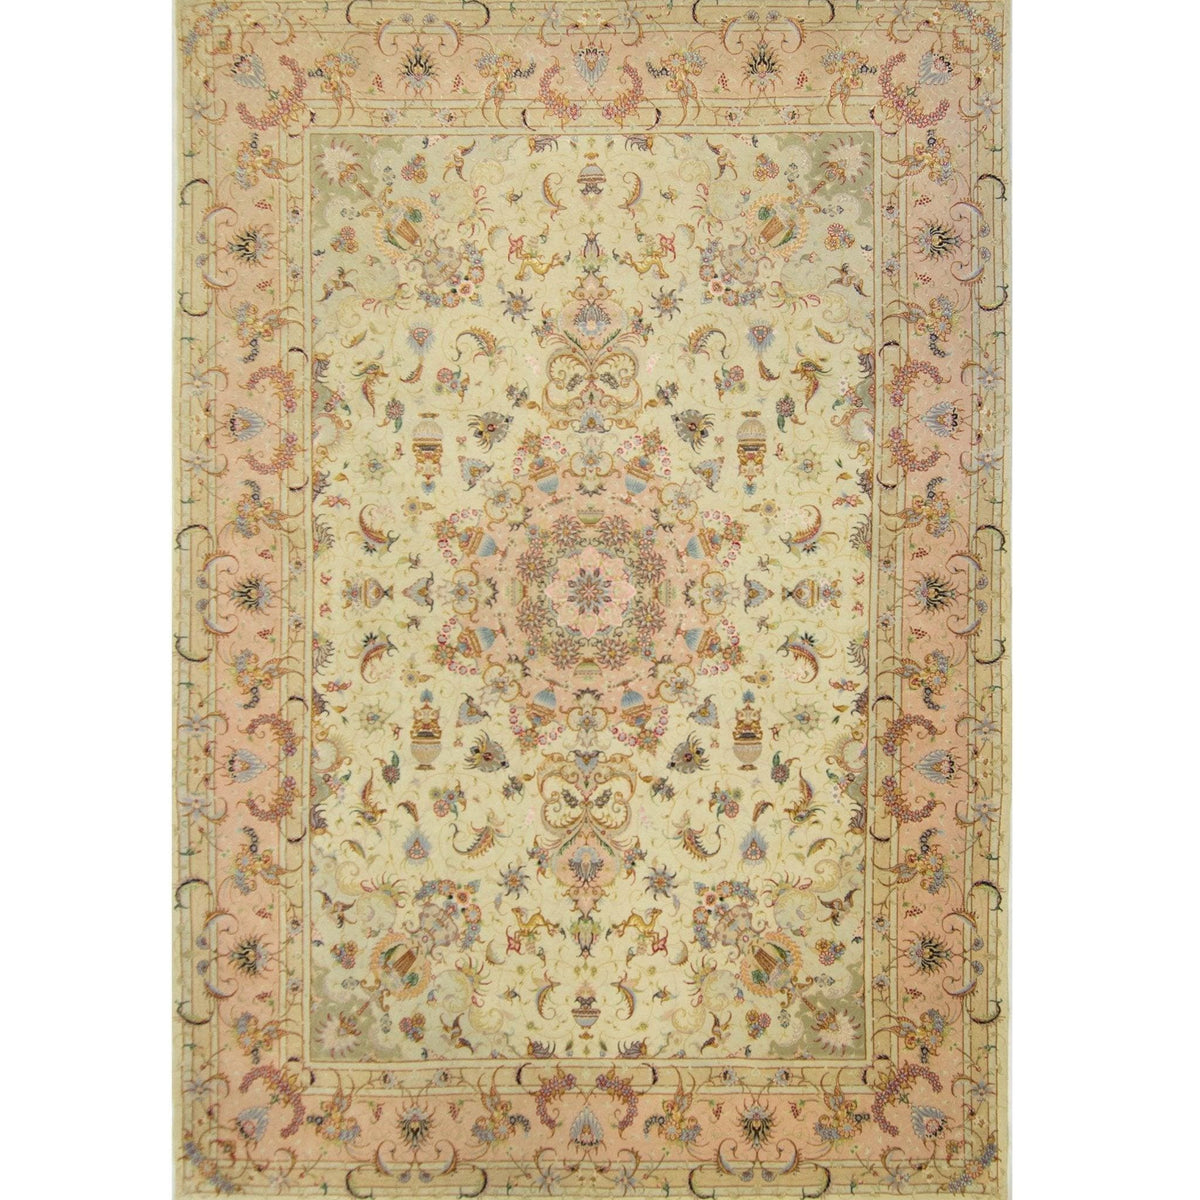 Super Fine Hand-knotted Wool and Silk Persian Rug 251 cm x 356 cm